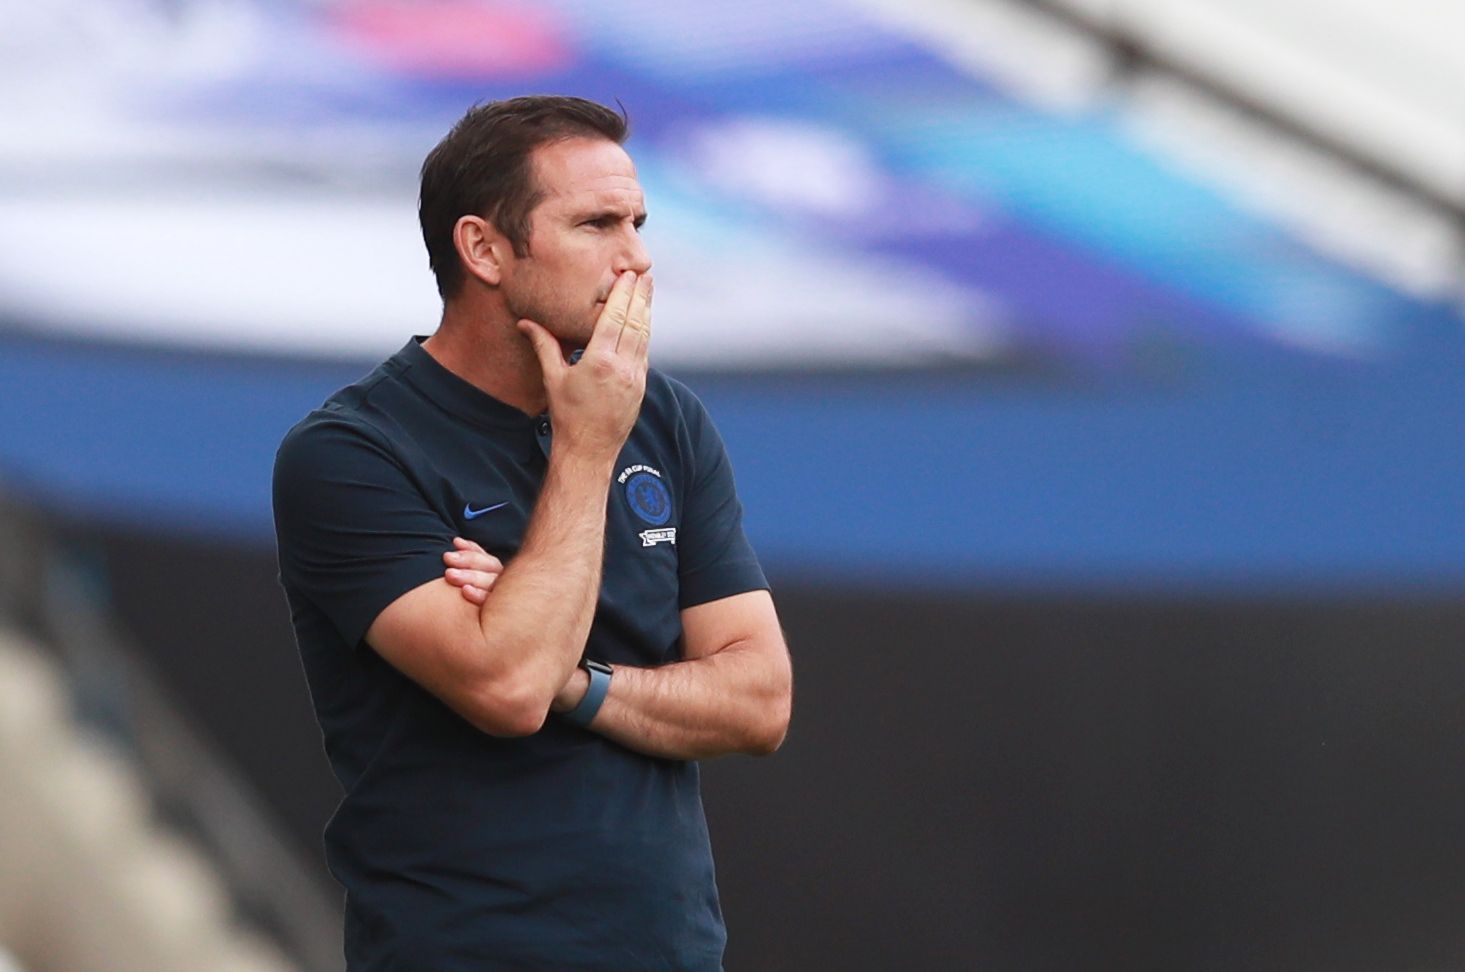 Soccer Football - FA Cup Final - Arsenal v Chelsea - Wembley Stadium, London, Britain - August 1, 2020 Chelsea manager Frank Lampard, as play resumes behind closed doors following the outbreak of the coronavirus disease (COVID-19) Pool via REUTERS/Adam Davy